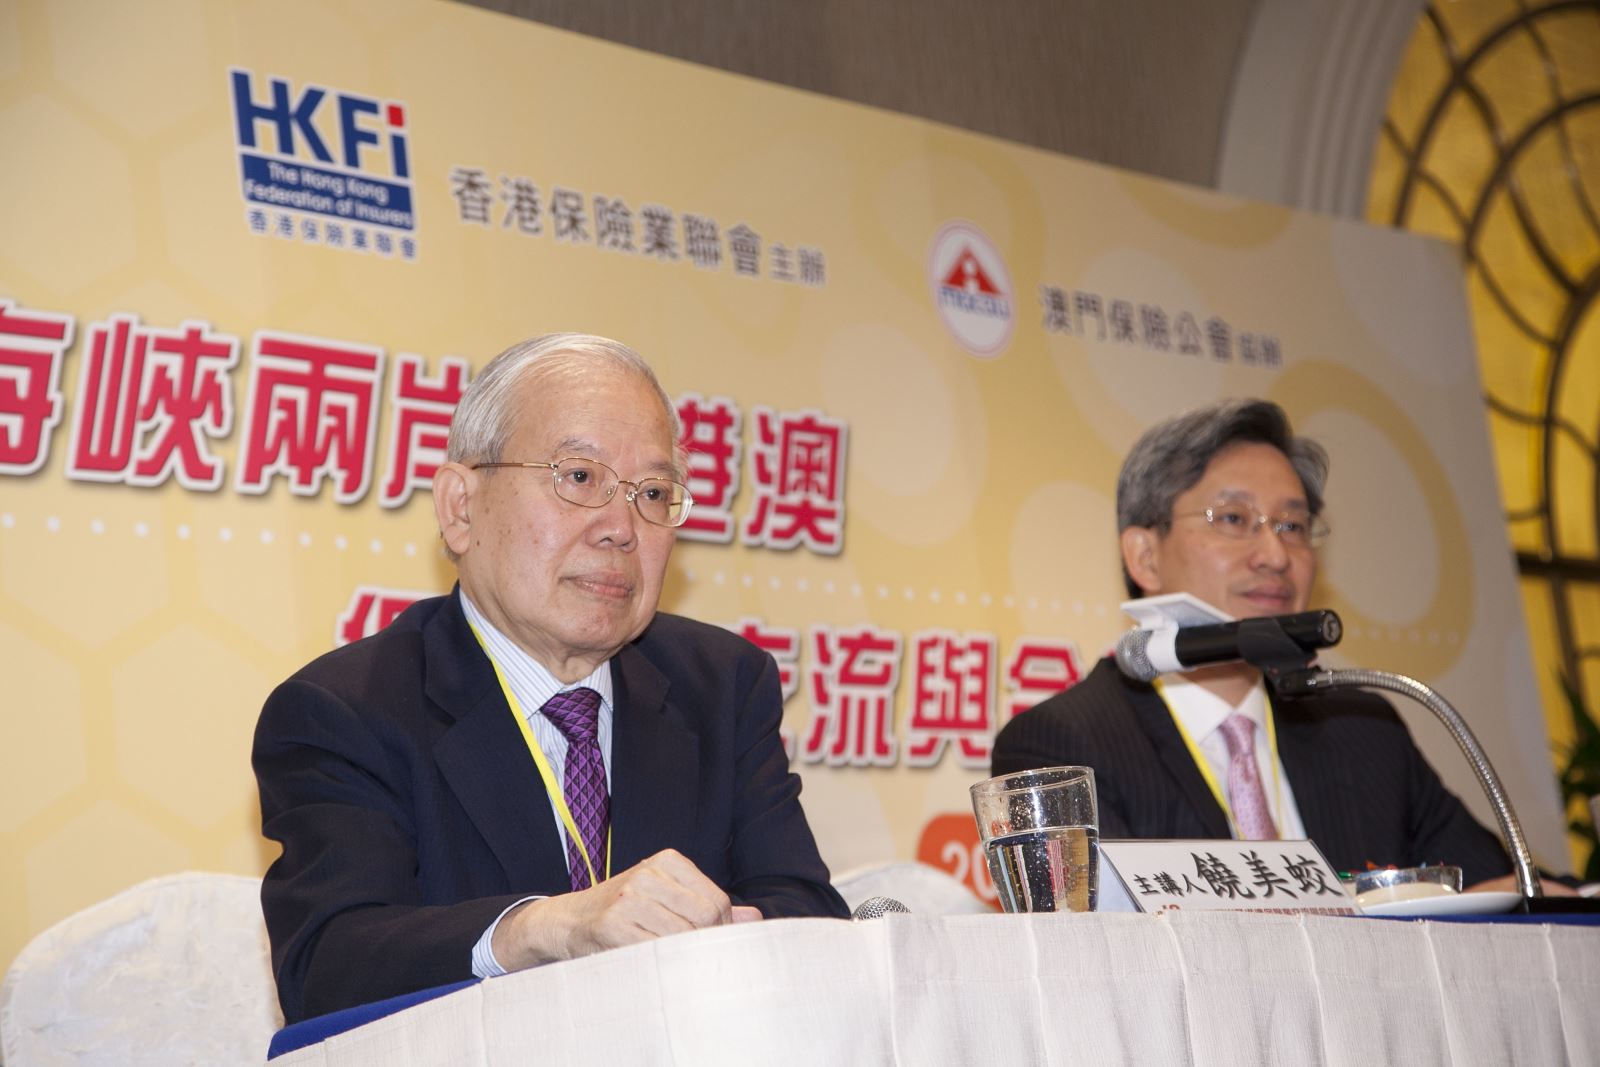 18th Cross-strait, Hong Kong & Macau Insurance Business Conference - Opening Ceremony & Plenary Session